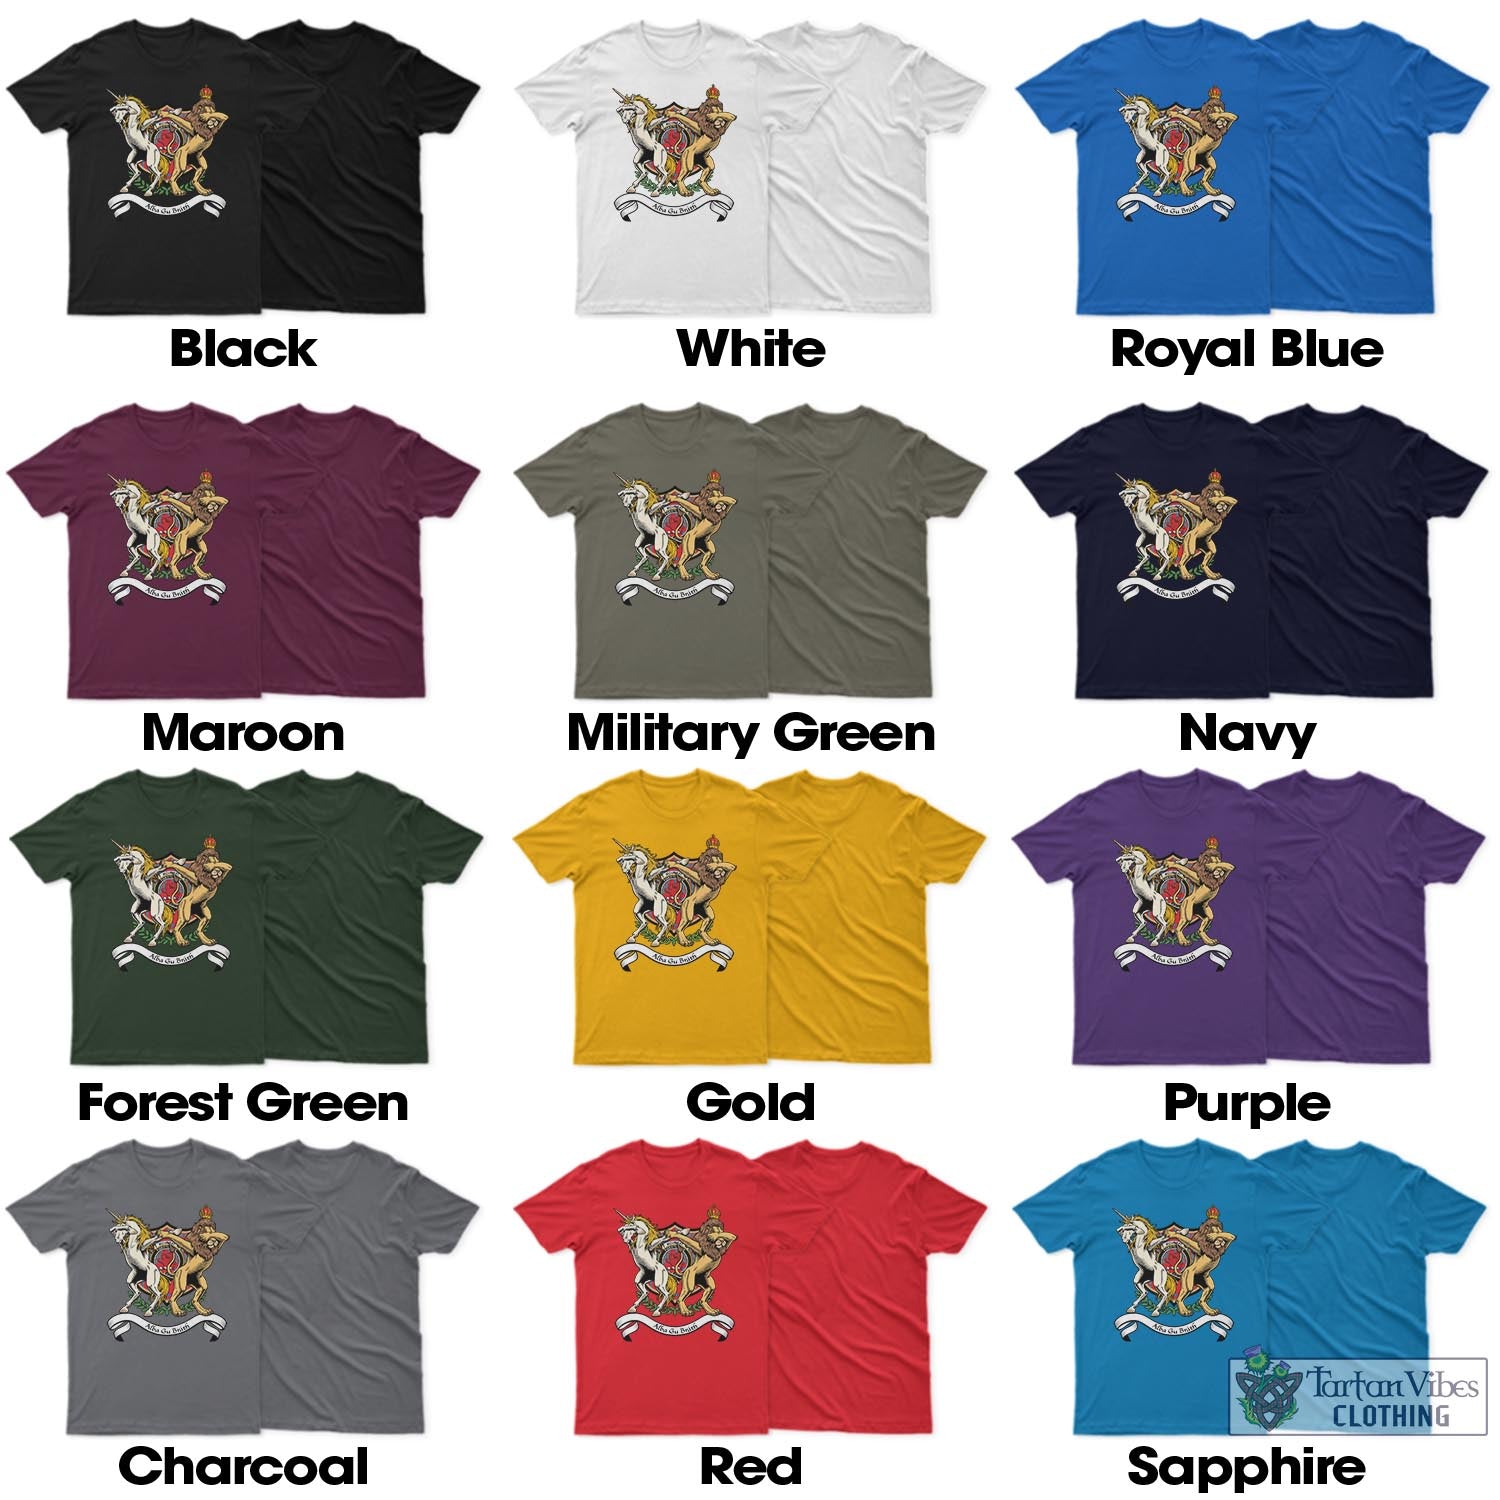 Tartan Vibes Clothing Moubray Family Crest Cotton Men's T-Shirt with Scotland Royal Coat Of Arm Funny Style